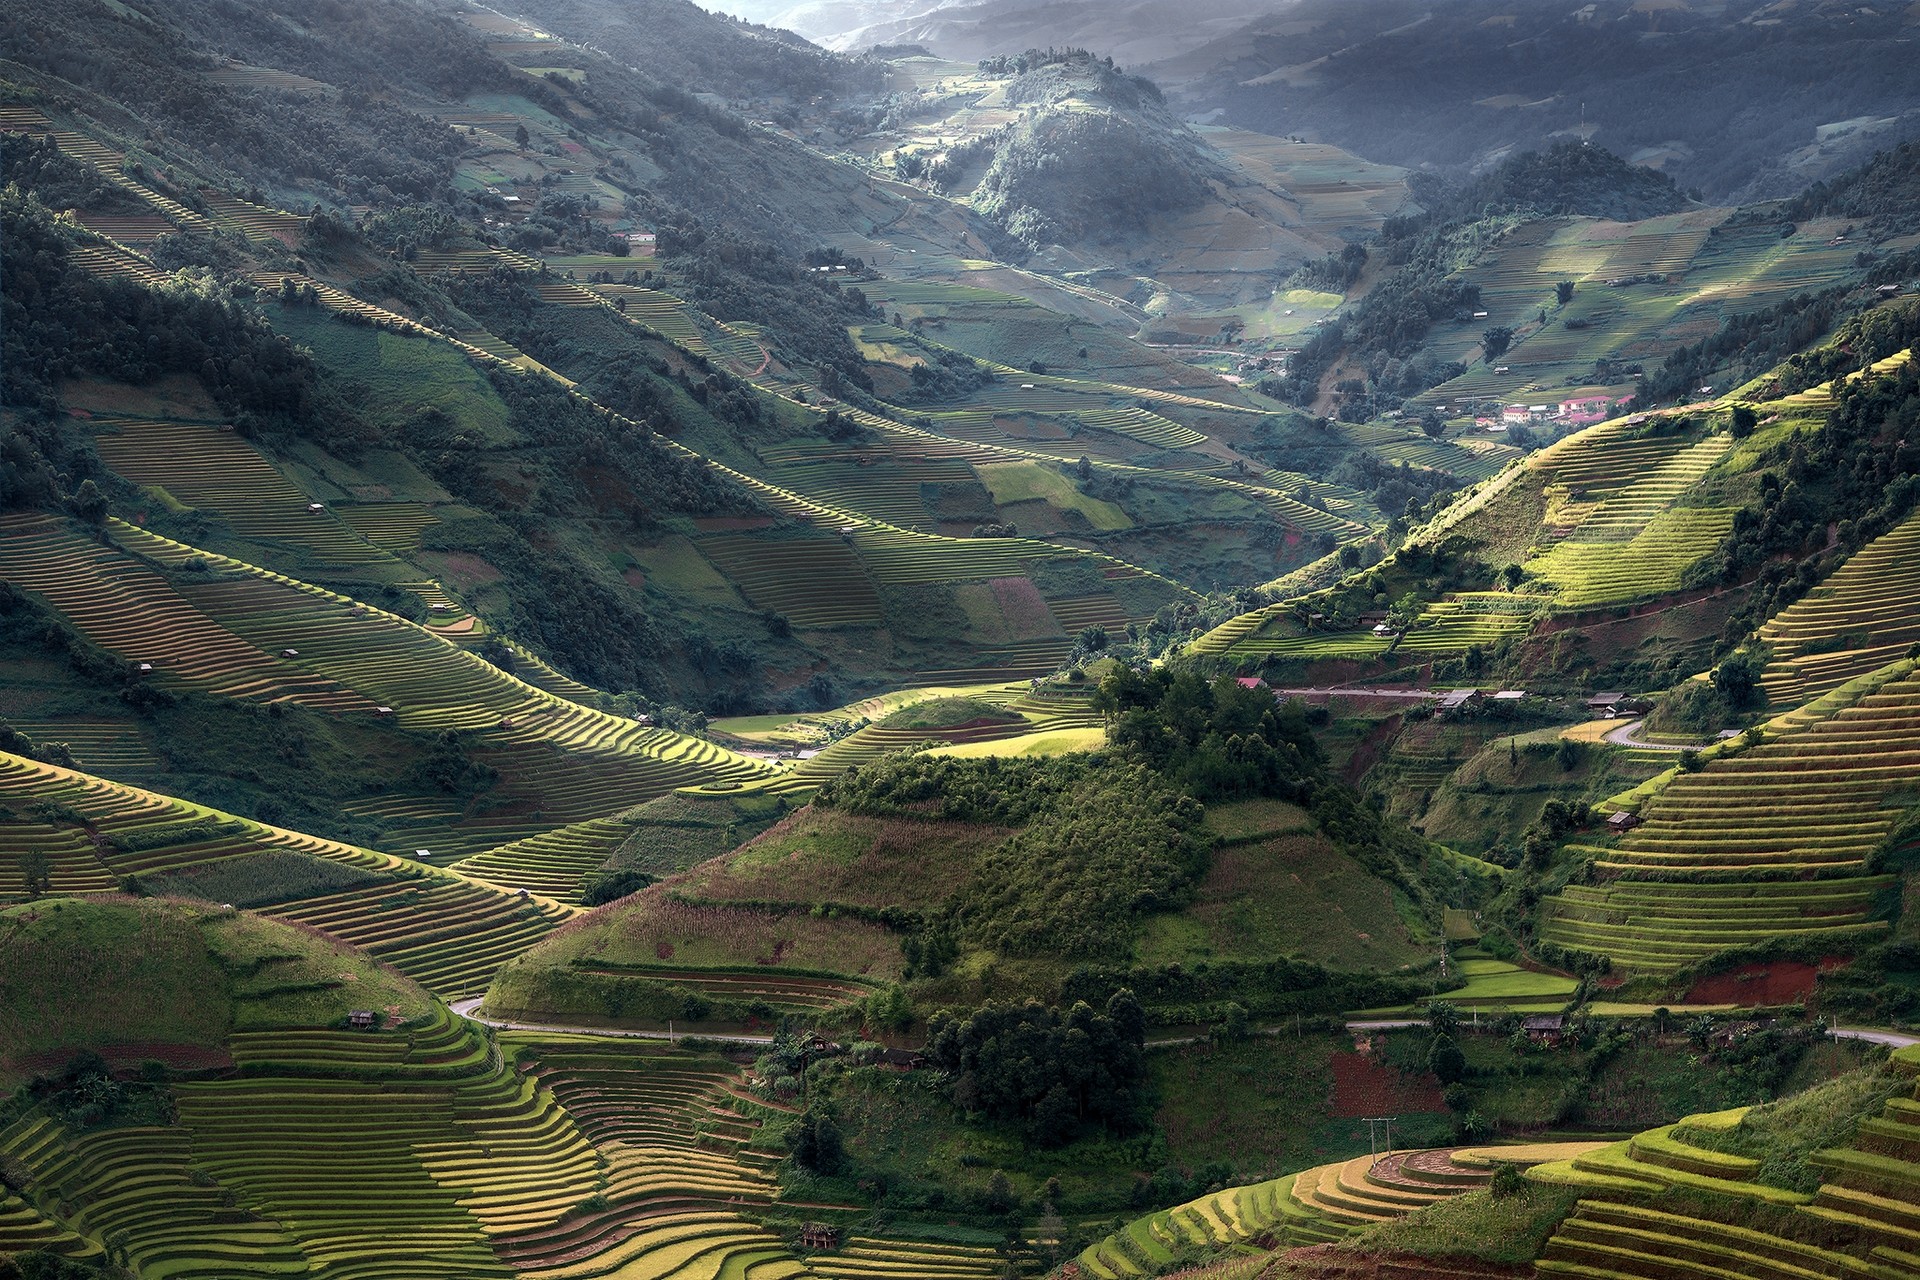 Nature Landscape Mountains Field Terraces Sunlight Road Trees Village Green Vietnam Rice Paddy 1920x1280